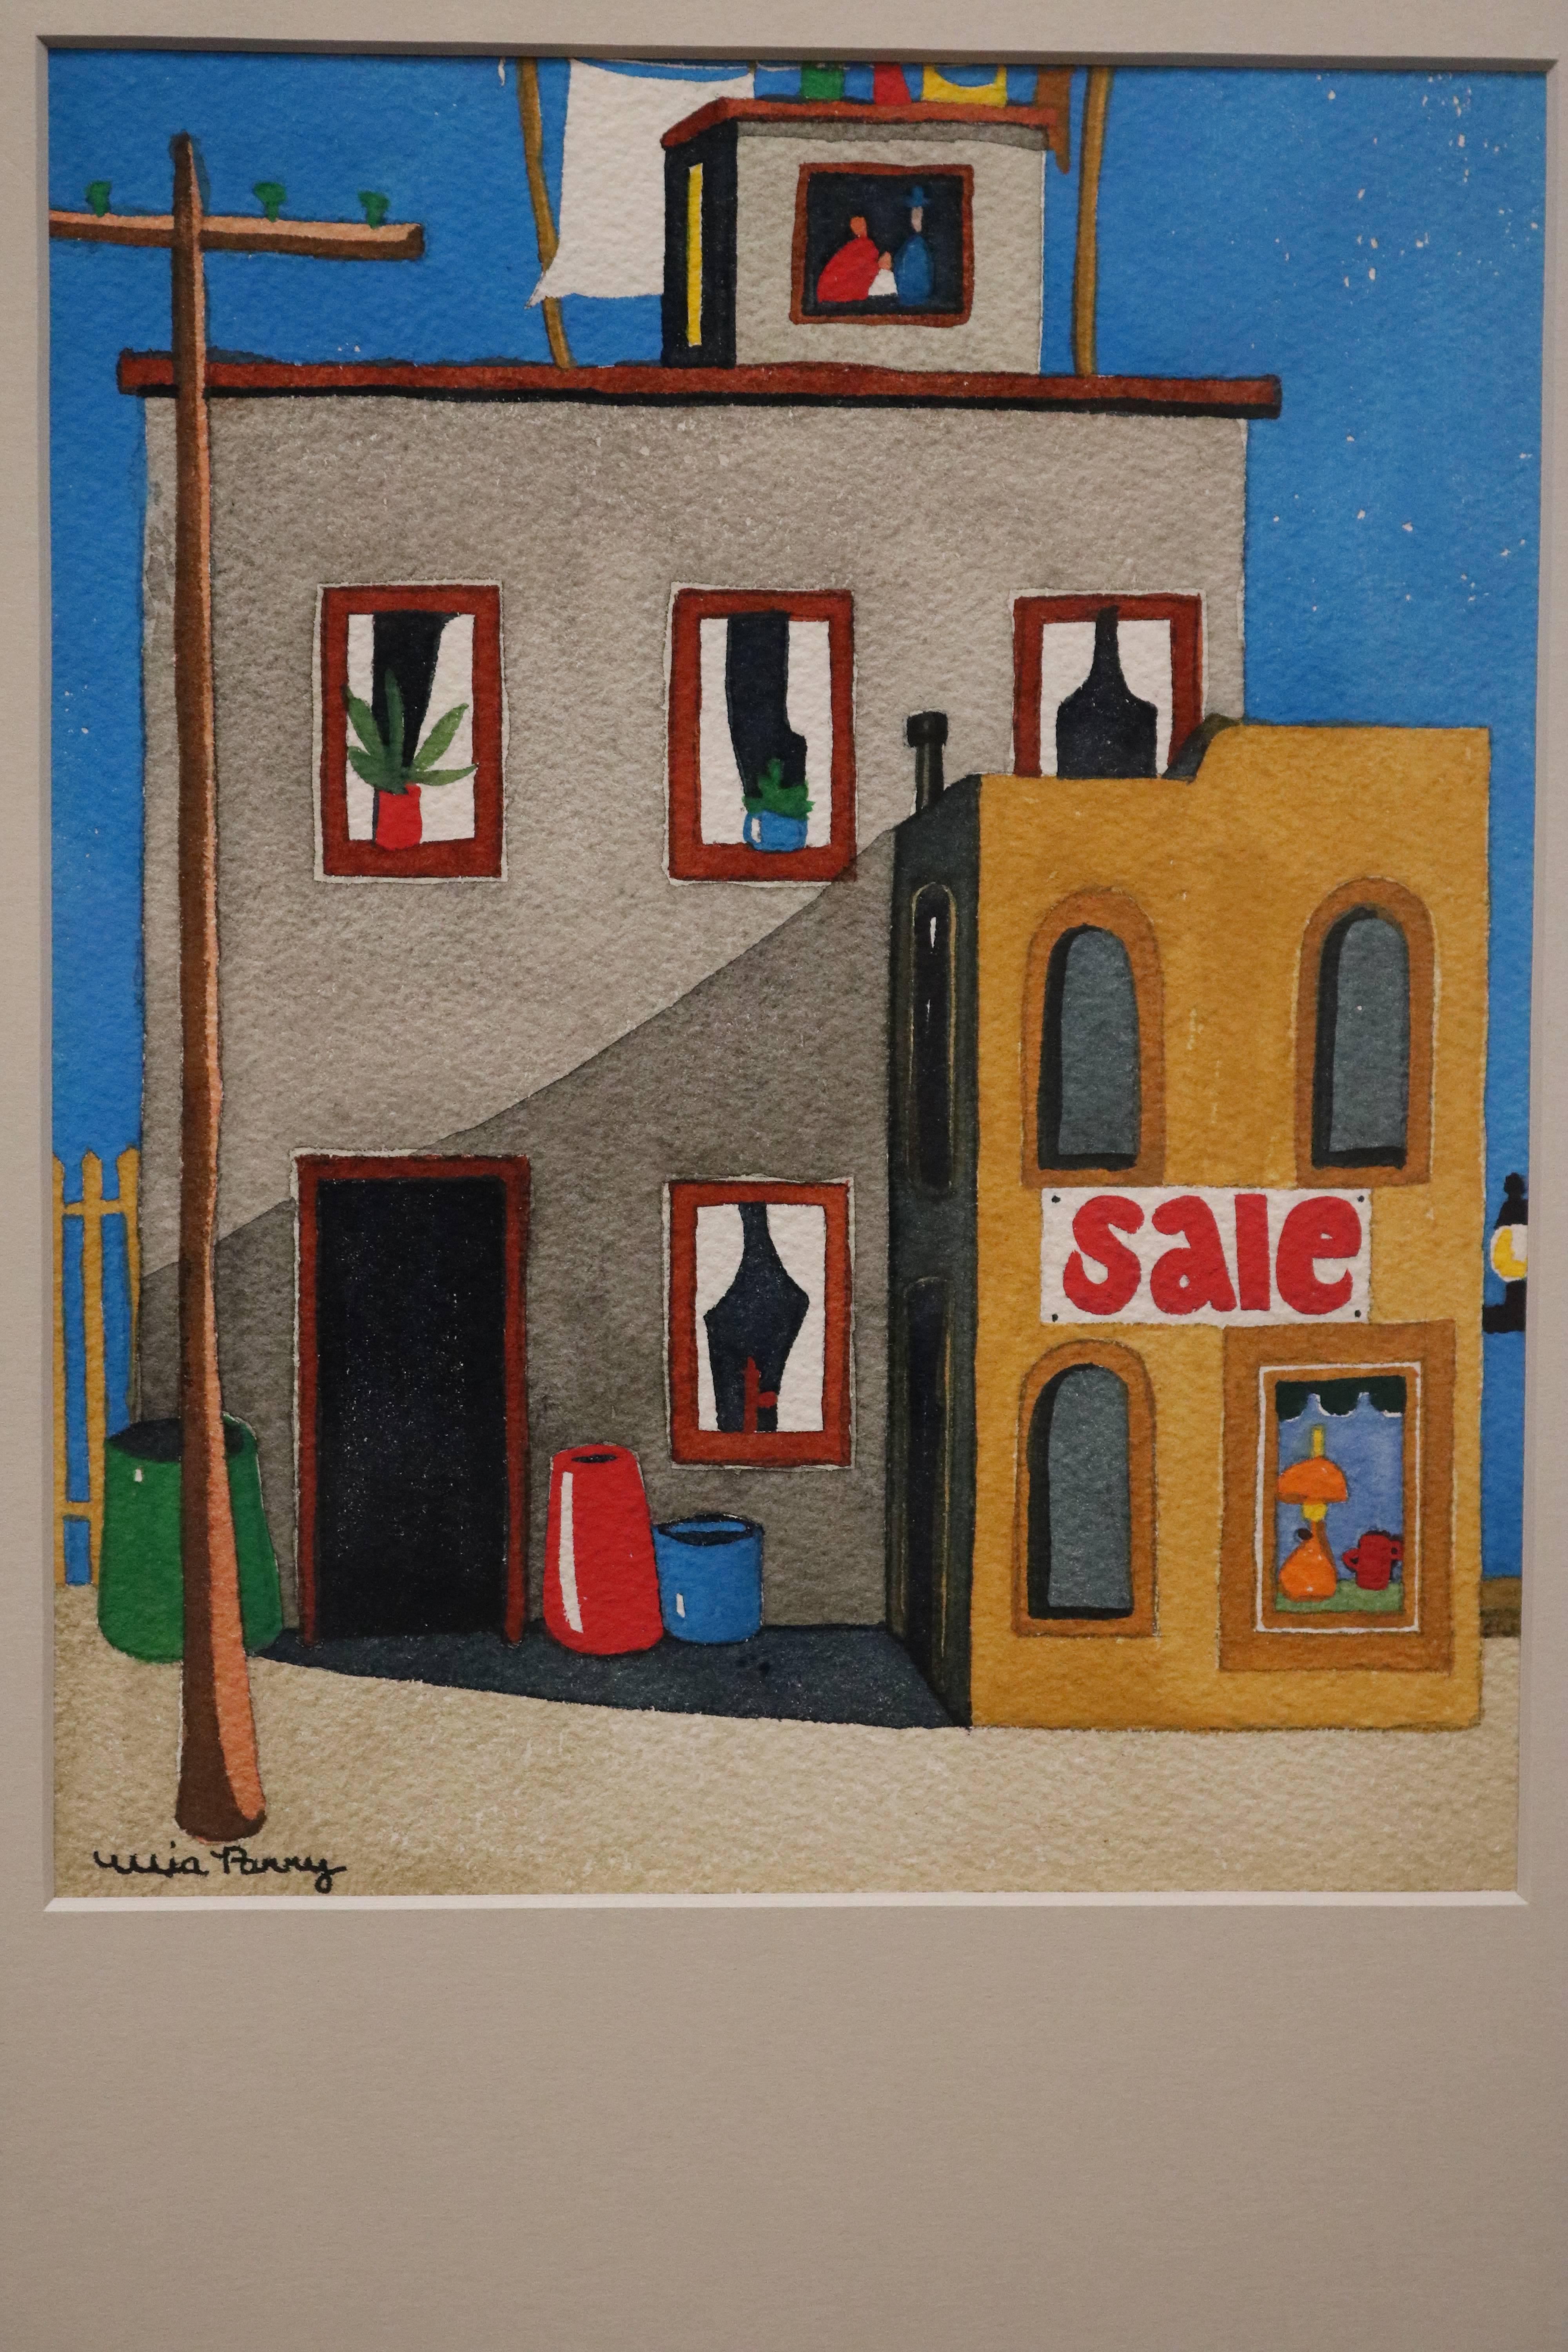 Mid-Century Modern Naive Watercolor Scene in the Manner of David Hockney